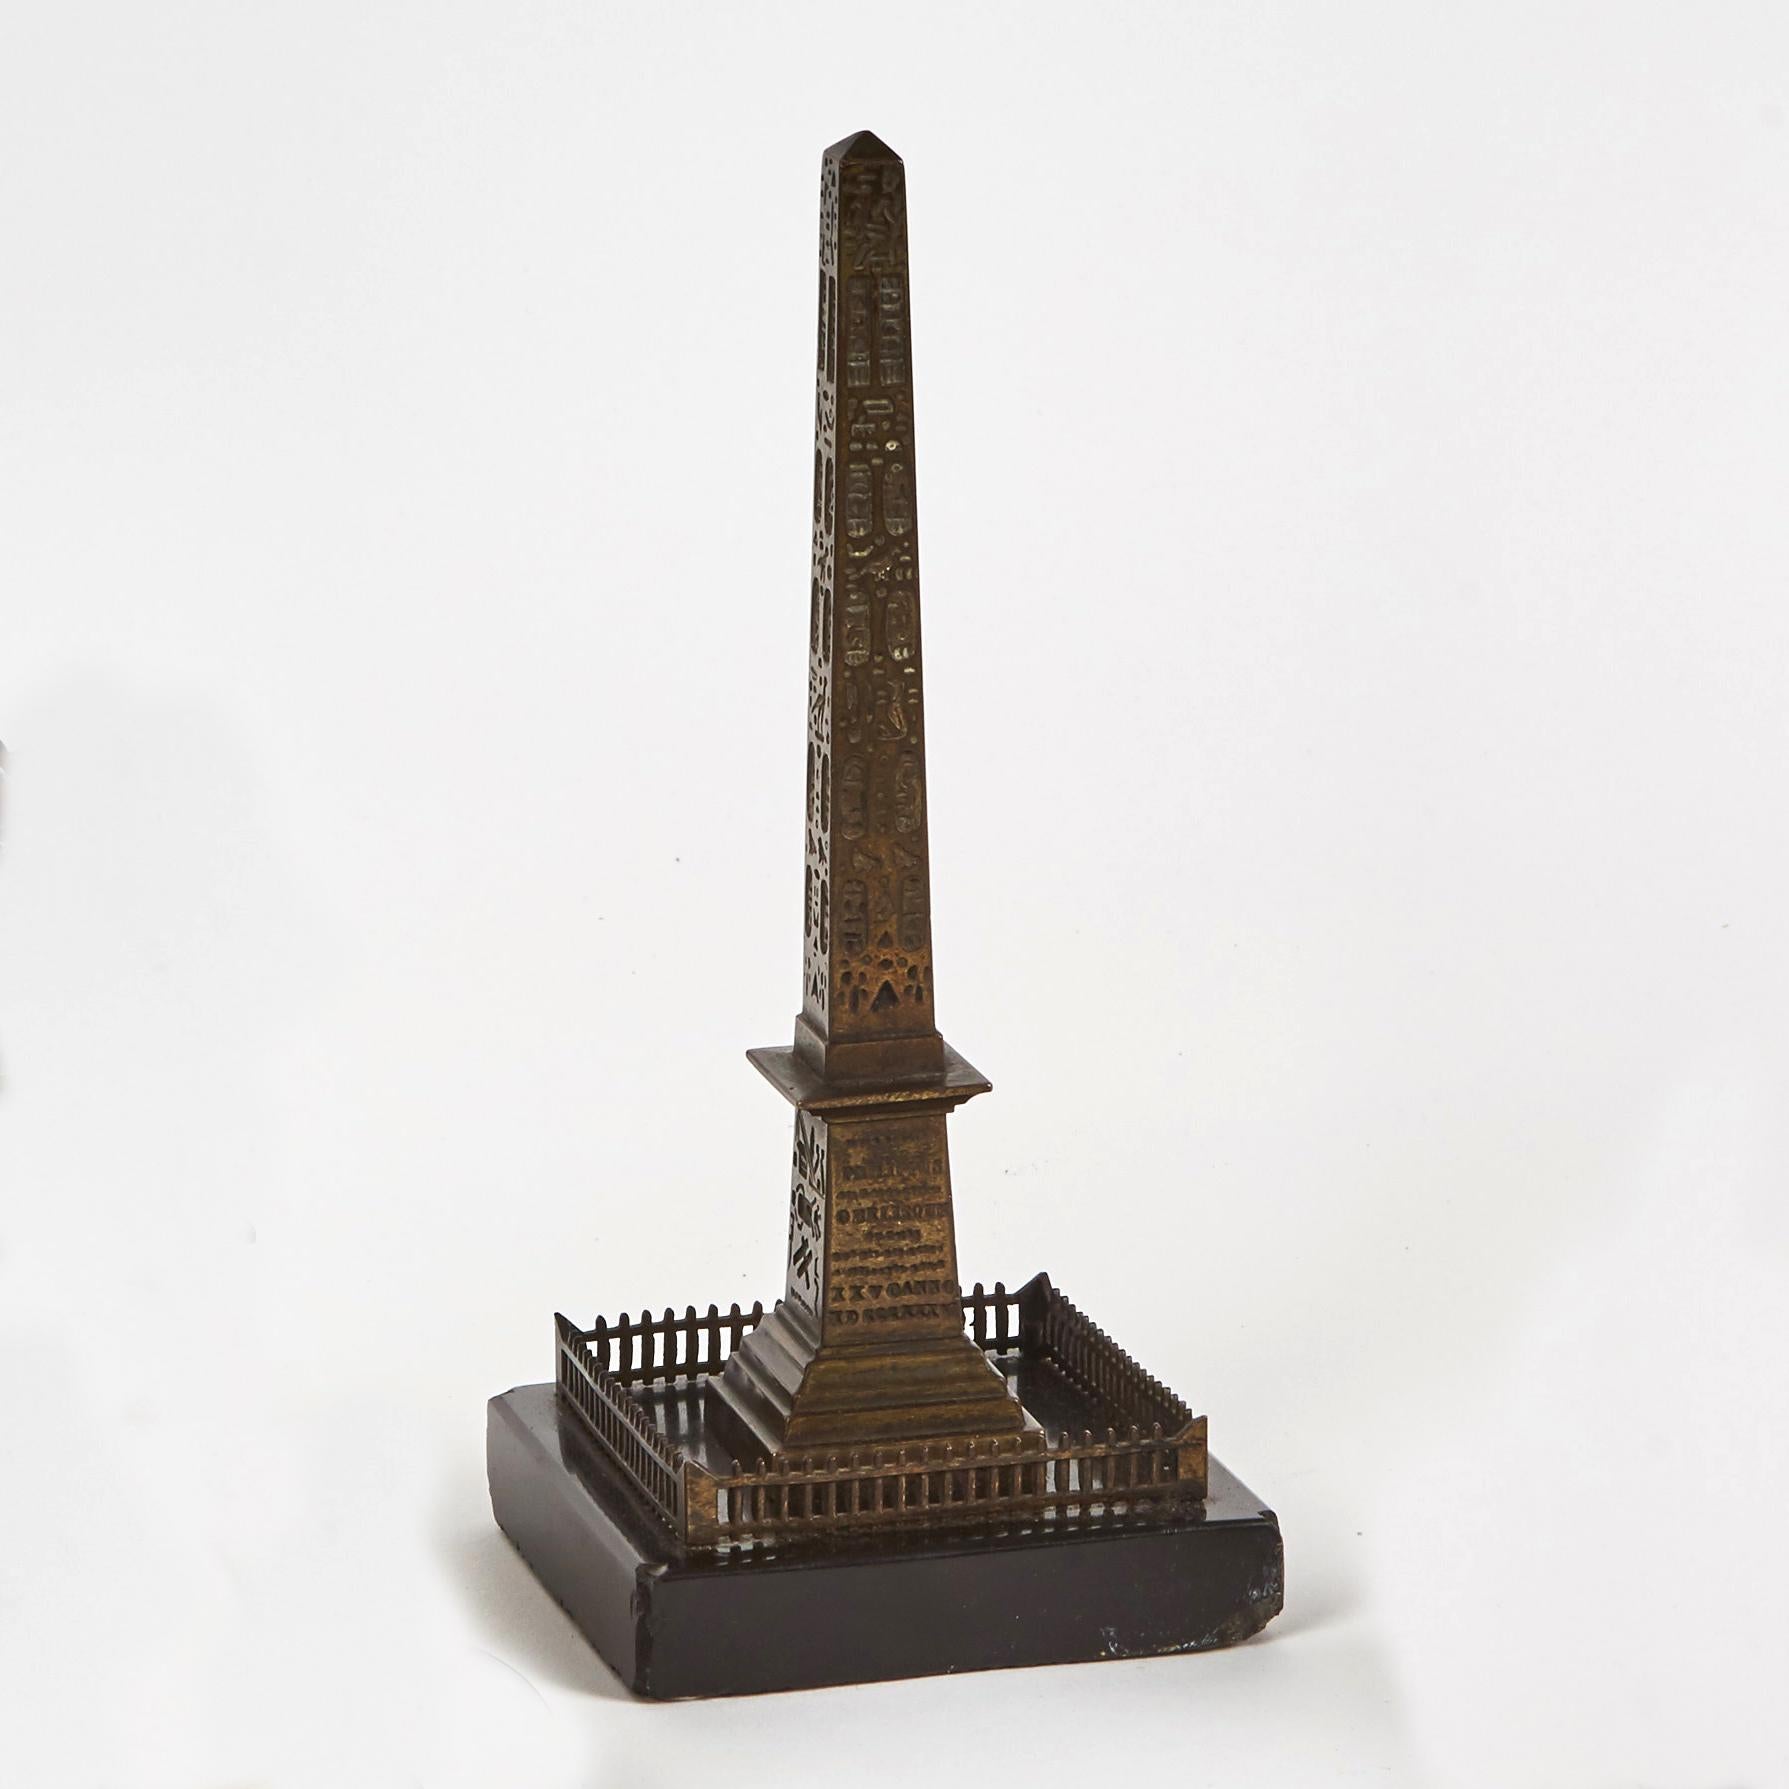 Collection of 19th-century French bronze sculptures of landmark monuments. Each piece is mounted on a smooth black marble base. The ancient Egyptian Luxor Obelisk, Paris's Arc de Triomphe and the Place Vendôme's famous column comprise this